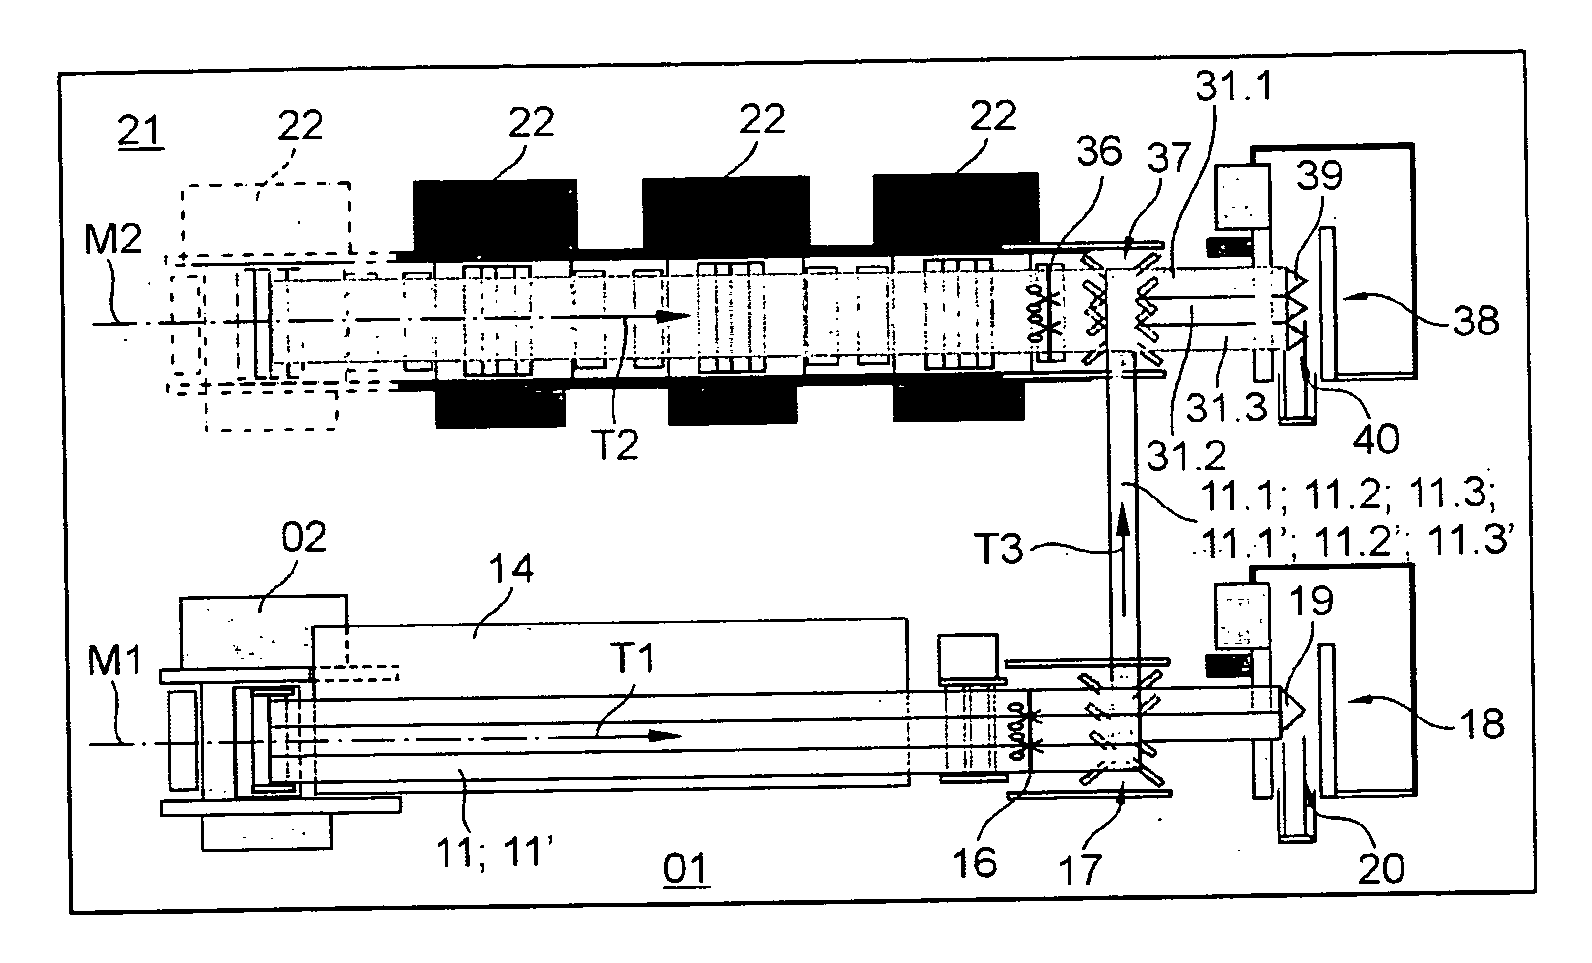 Printing press and method of operating a printing press, and printing press system and method of operating the printing press system